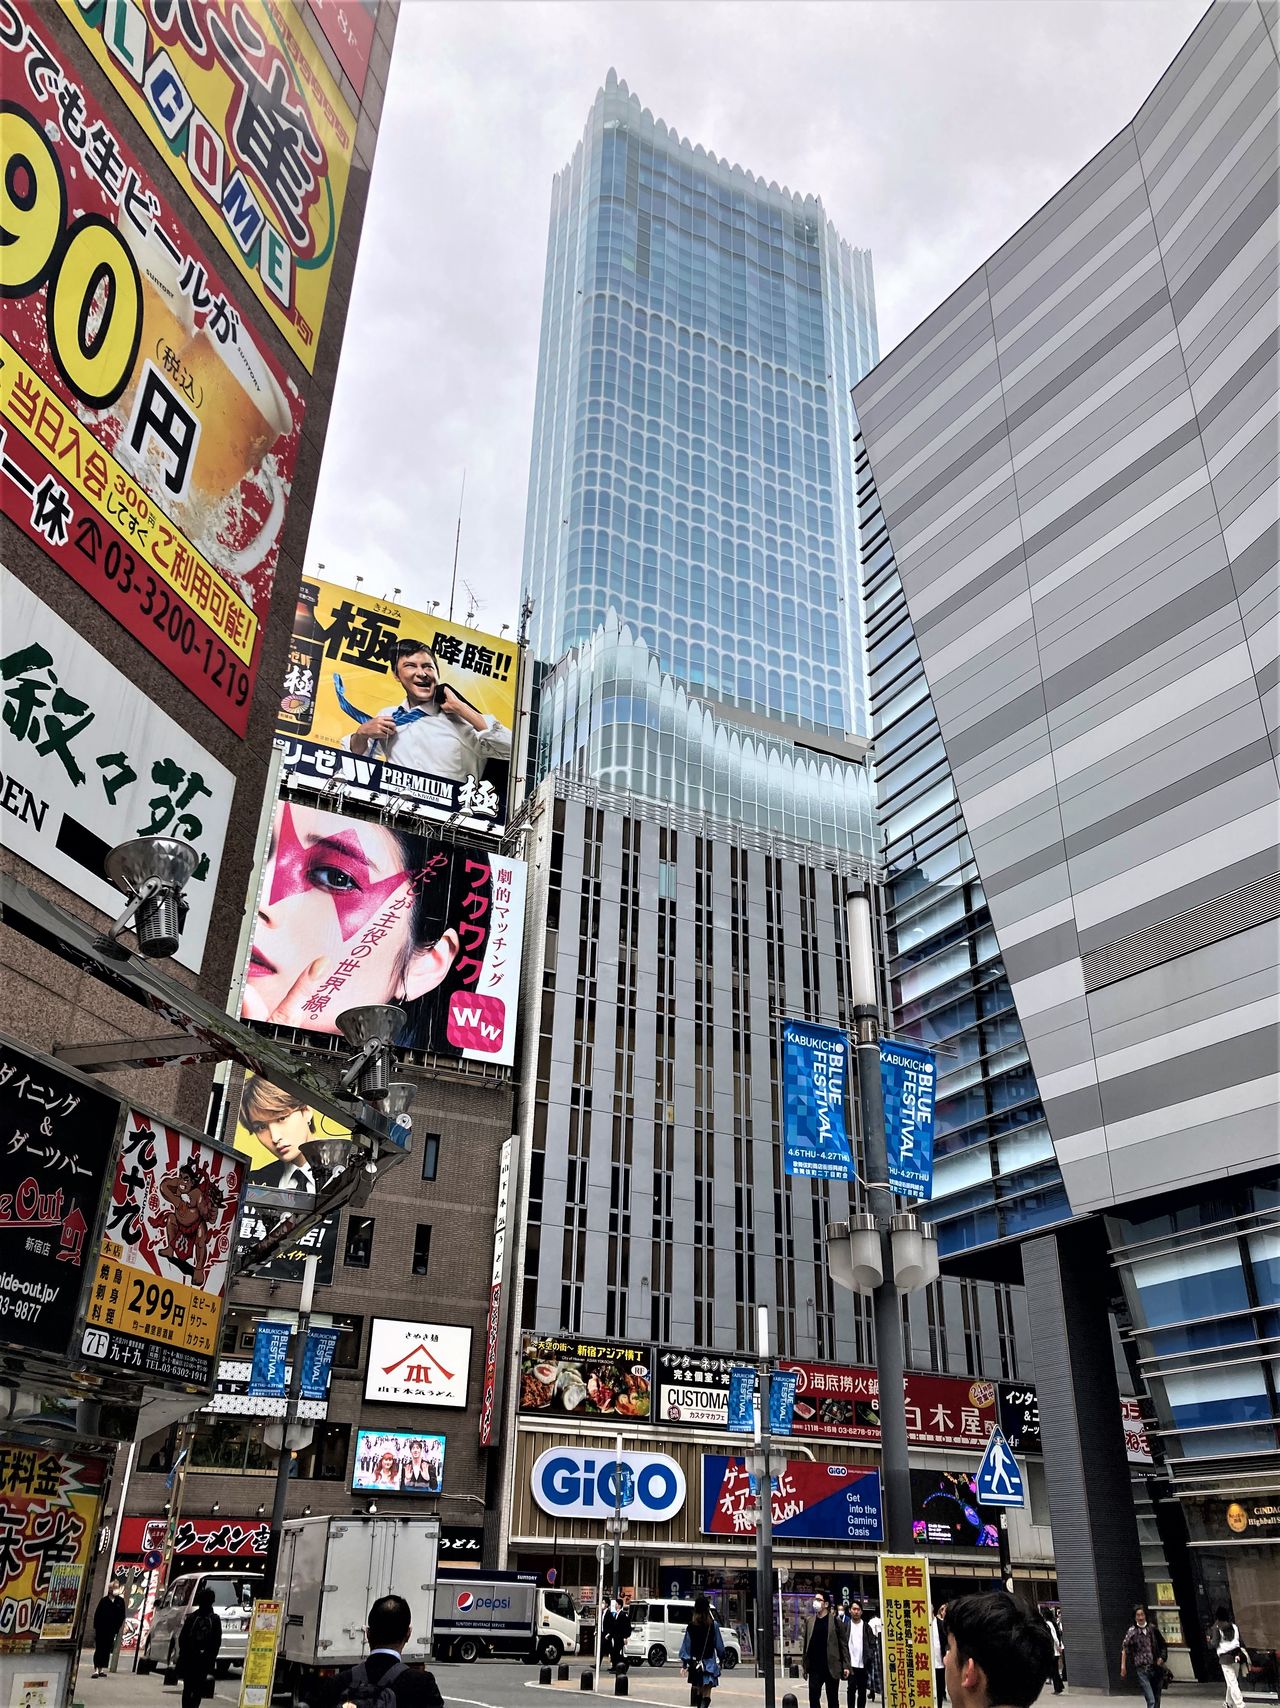 Tōkyū Kabukichō rises above the rest of the skyline. It is a one-minute walk from Seibu-Shinjuku Station and seven minutes from JR Shinjuku Station, and has bus connections to both Haneda and Narita Airports.